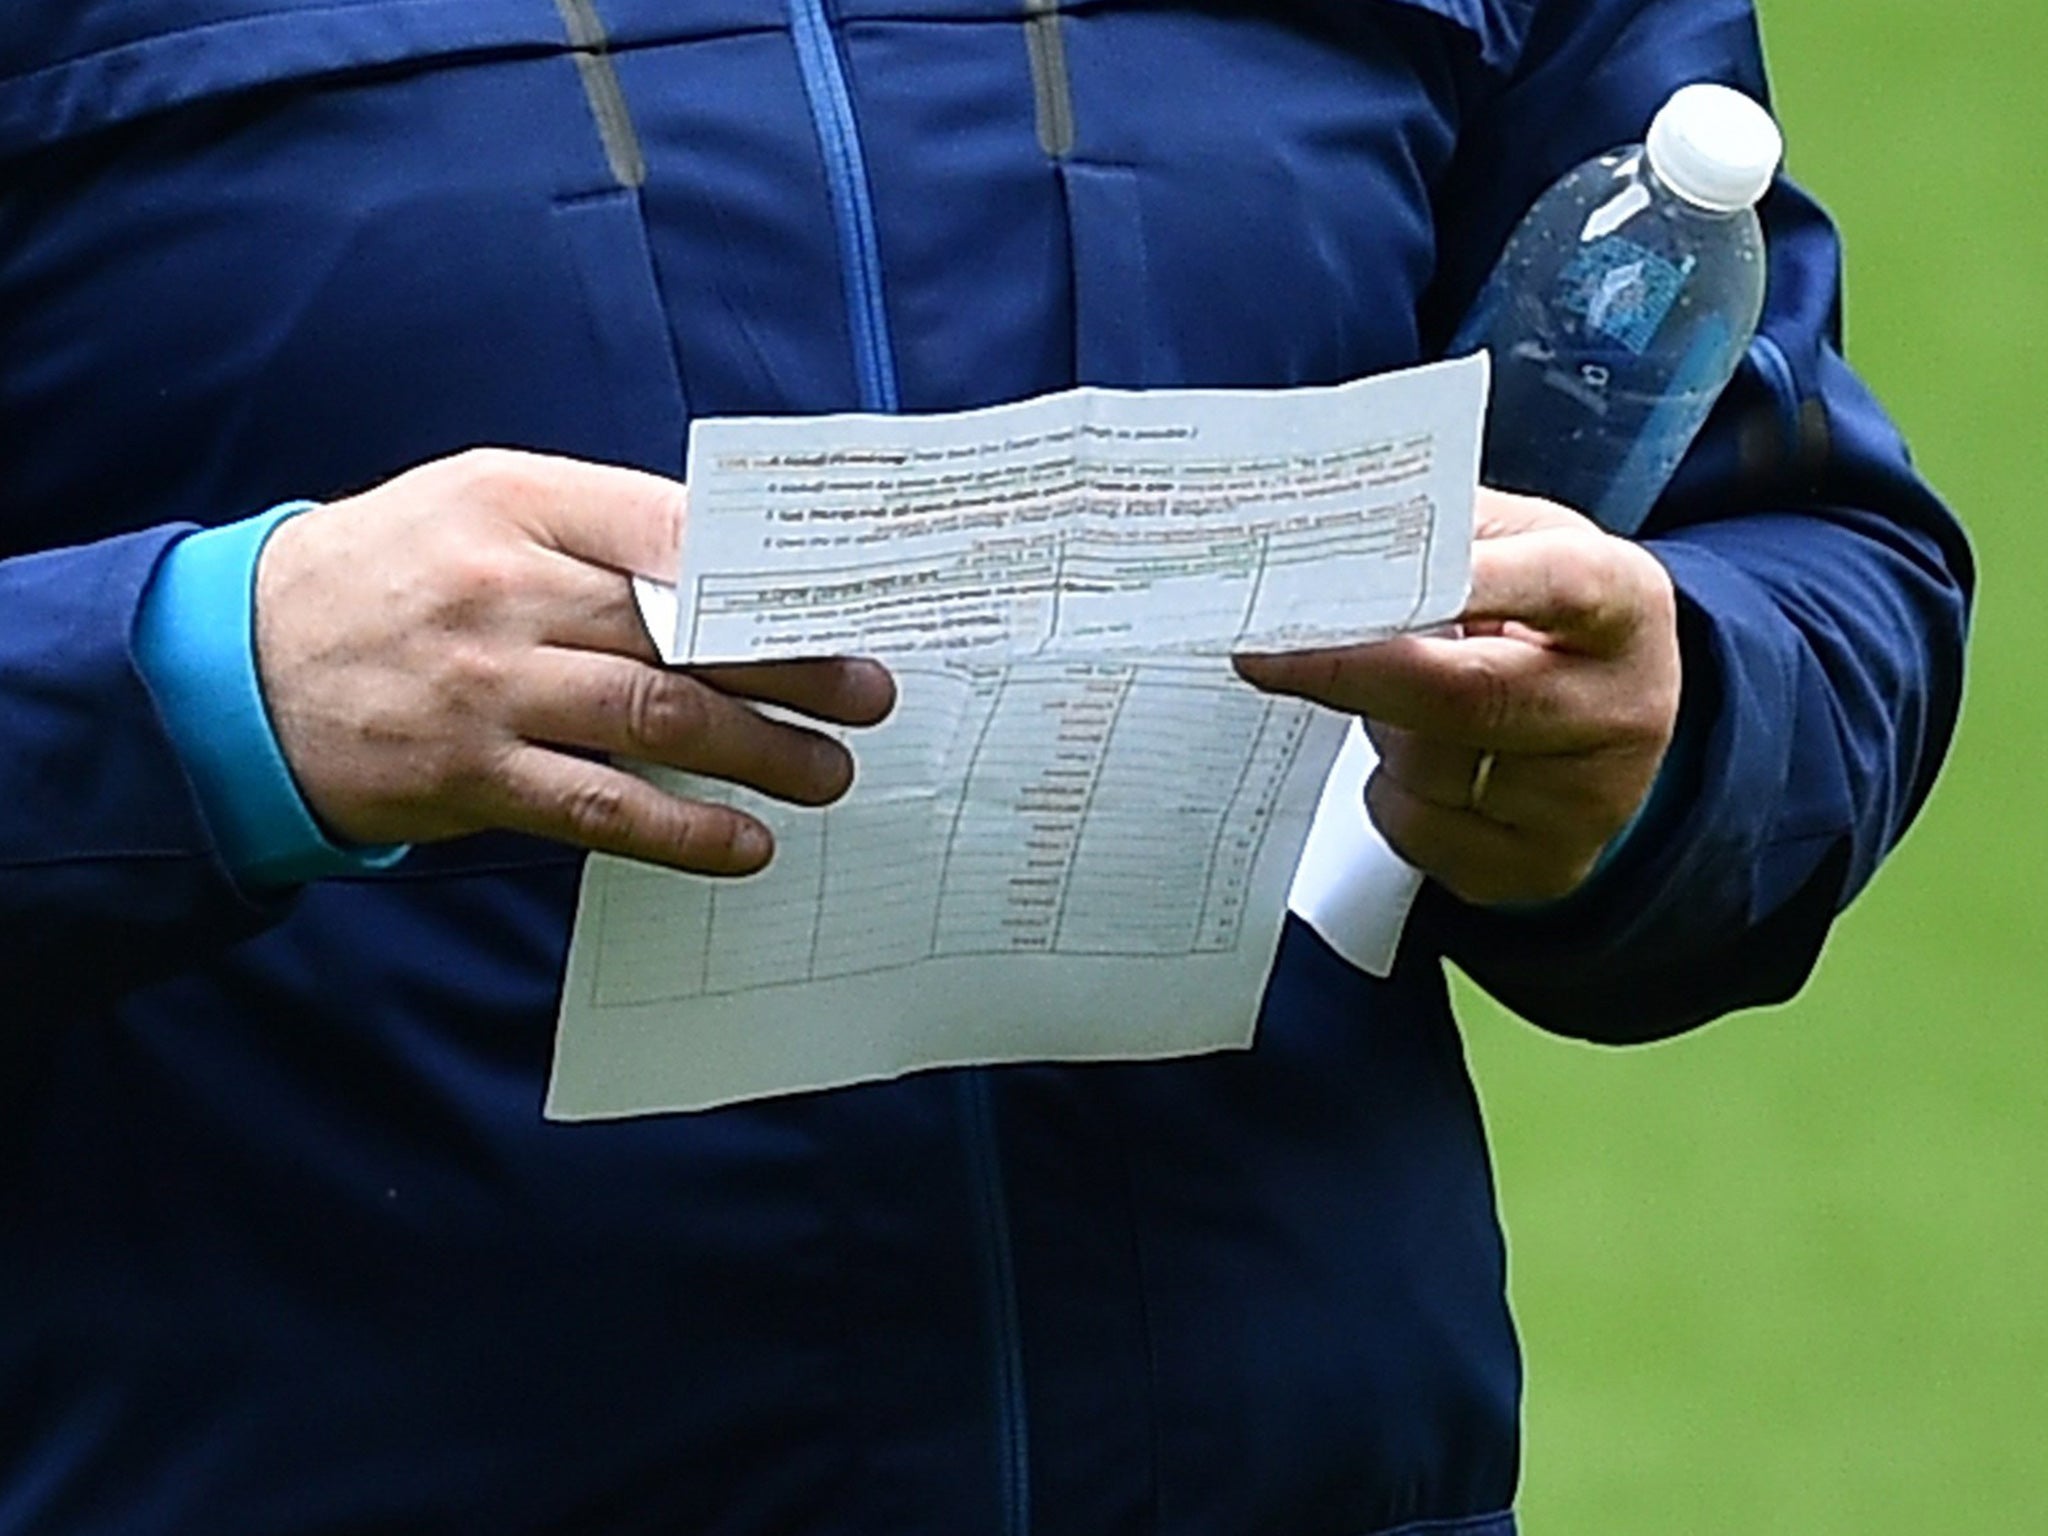 &#13;
The notes spotted in scrum coach Mario Ledesma's hands&#13;